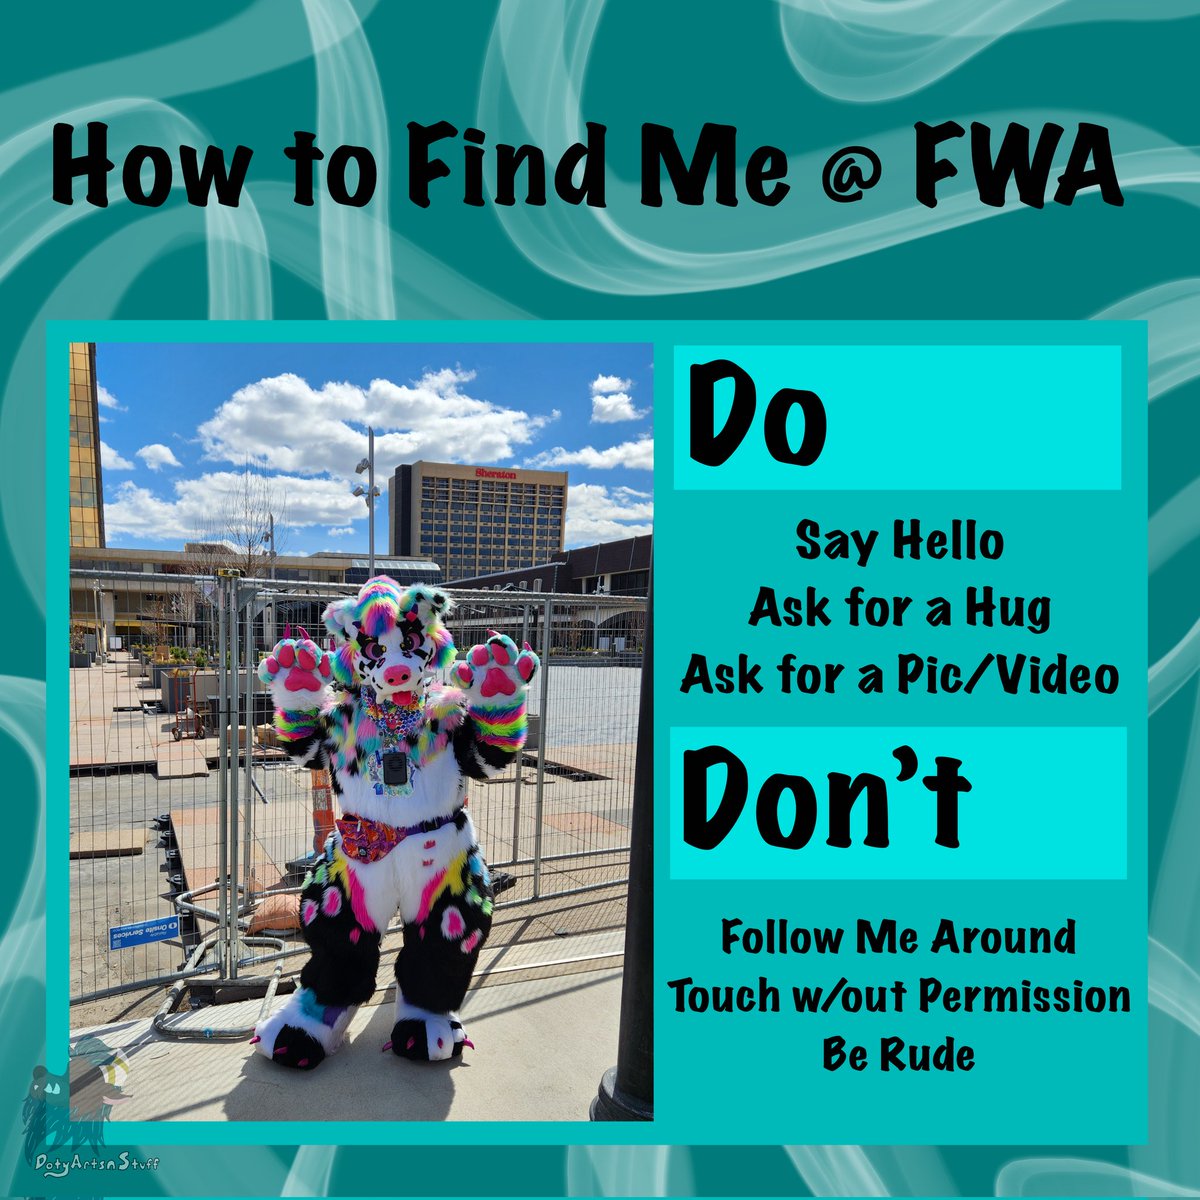 Here is how to find me at Furry Weekend Atlanta this week, can't wait to go. 

#furry #furryfandom #furrycommunity #fursona #fursuit #fullsuit #fursuiting #fursuiter #convention #furrycon #furryconvention #fwa #fwa2024 #furryweekendatlanta #furryweekendatlanta2024